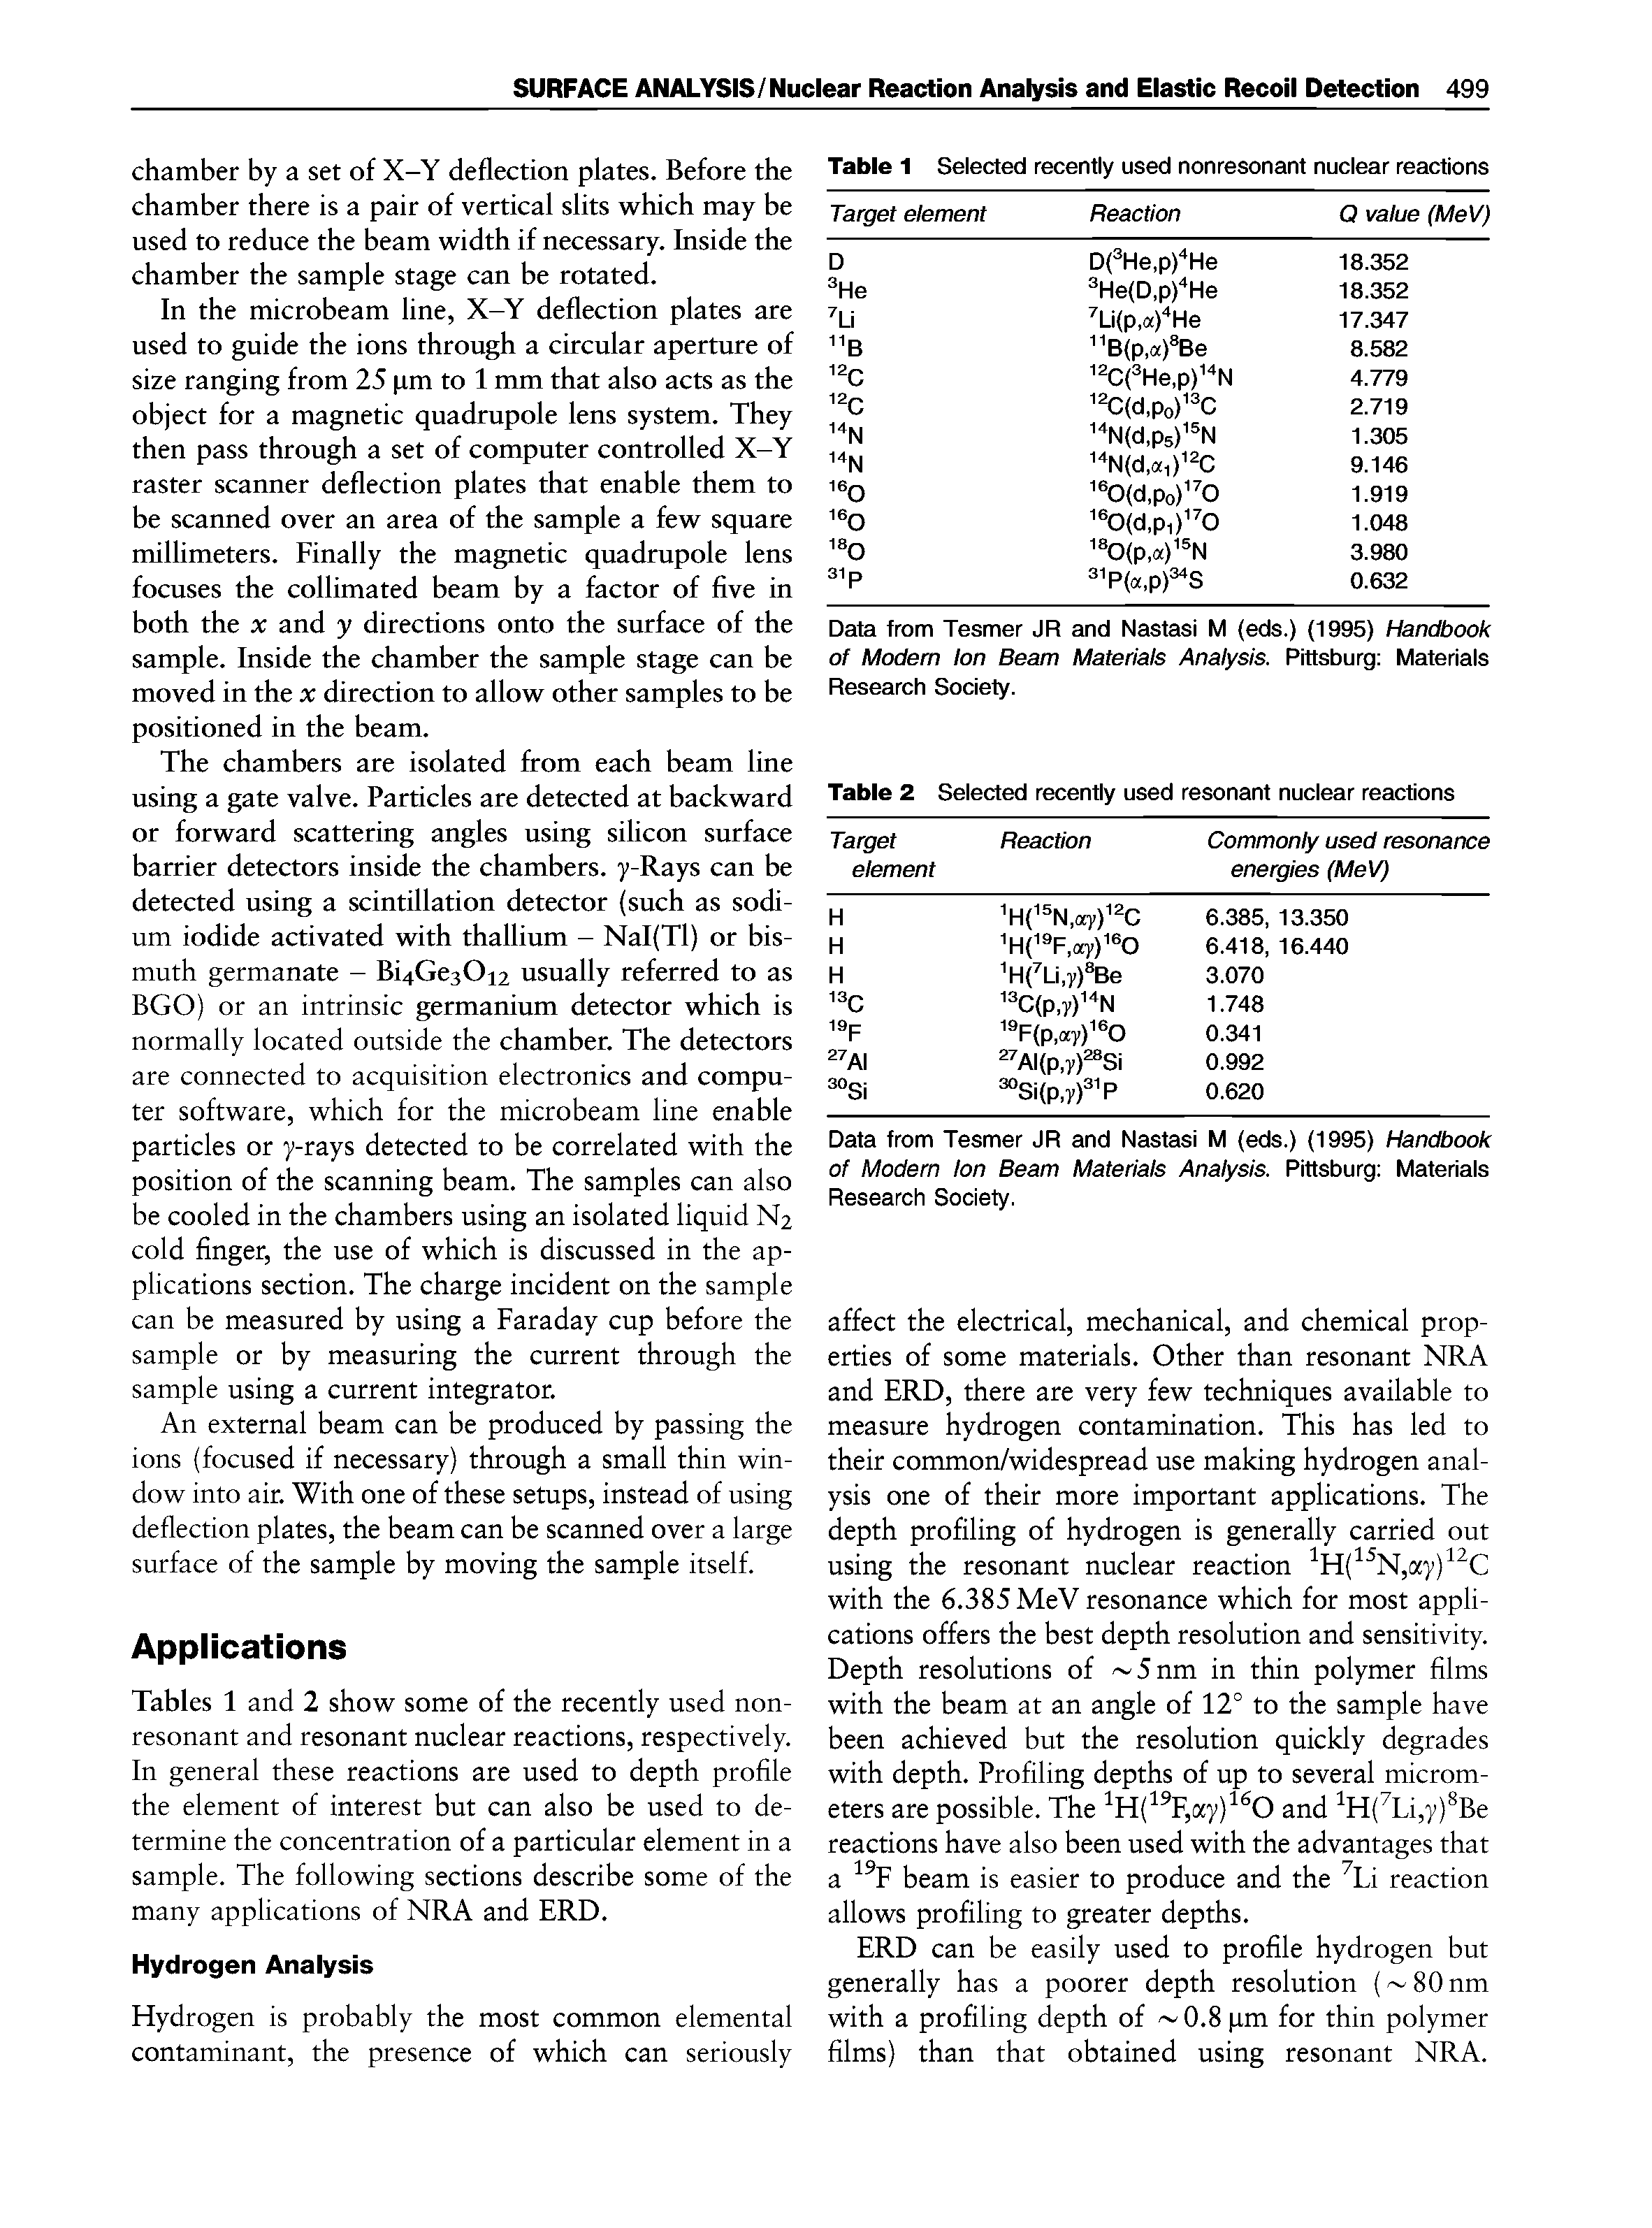 Tables 1 and 2 show some of the recently used non-resonant and resonant nuclear reactions, respectively. In general these reactions are used to depth profile the element of interest but can also be used to determine the concentration of a particular element in a sample. The following sections describe some of the many applications of NRA and ERD.